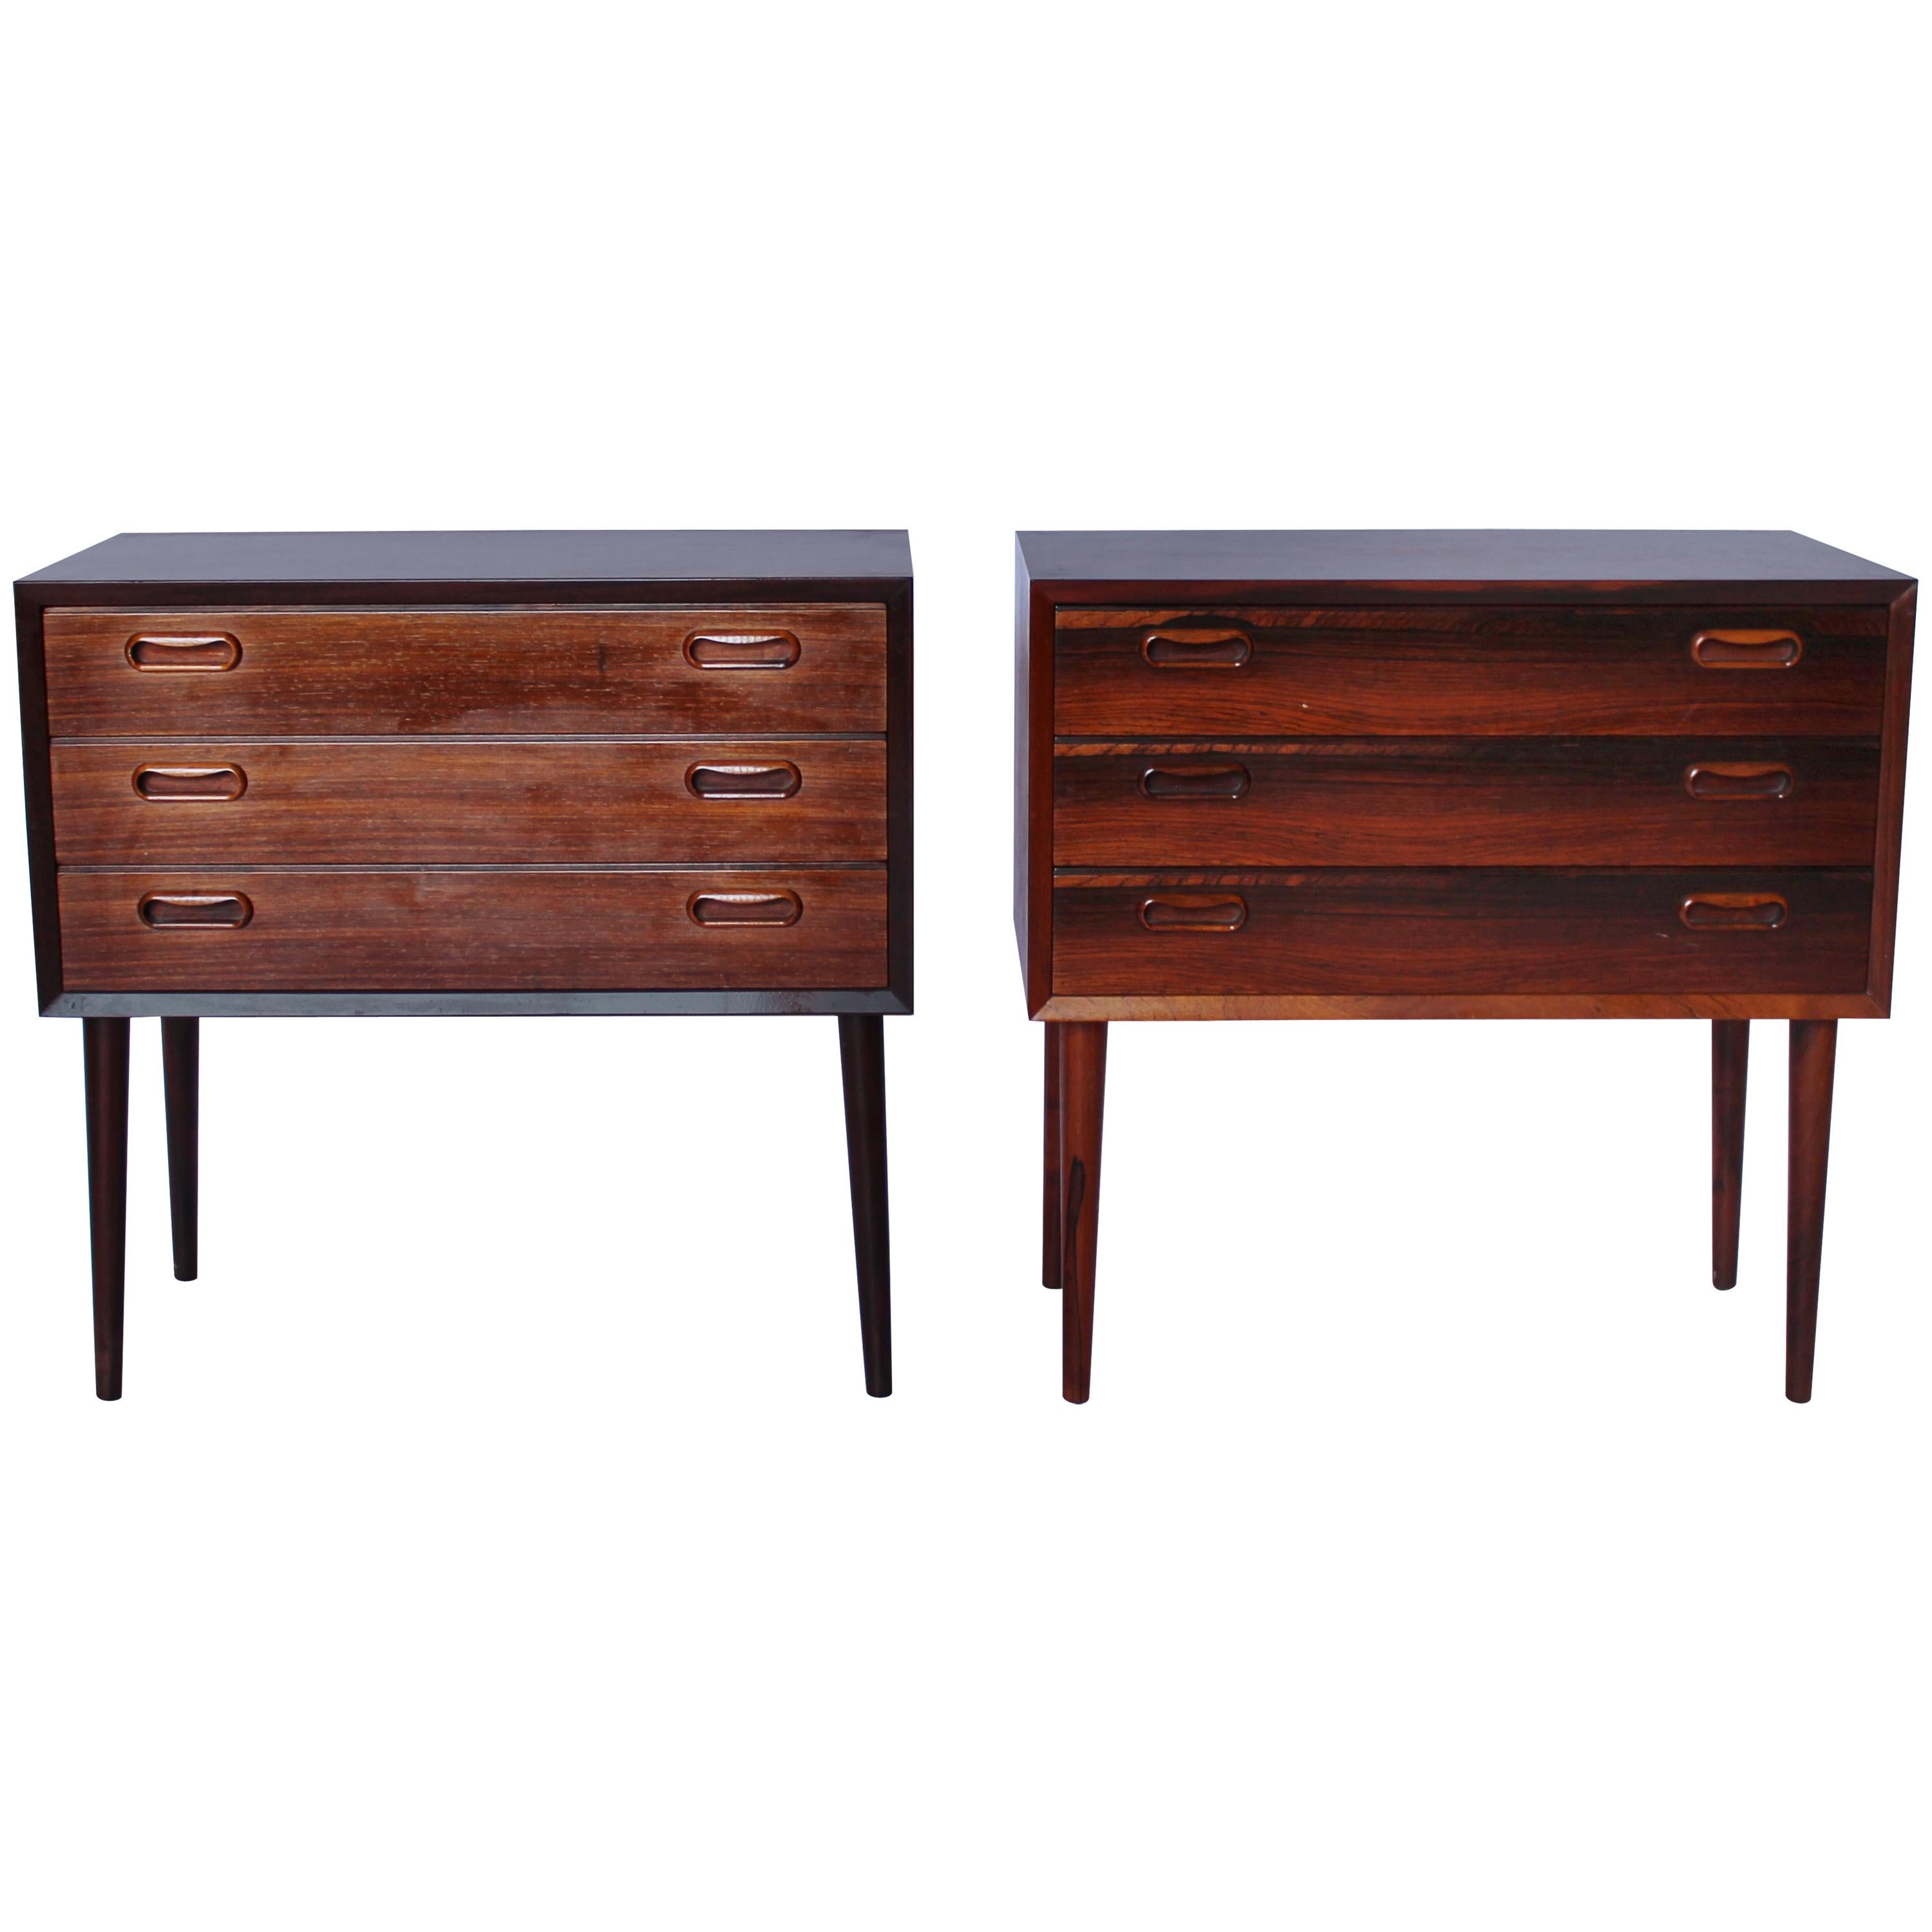 Set of Bedside Tables or Chests in Rosewood of Danish Design from the 1960s